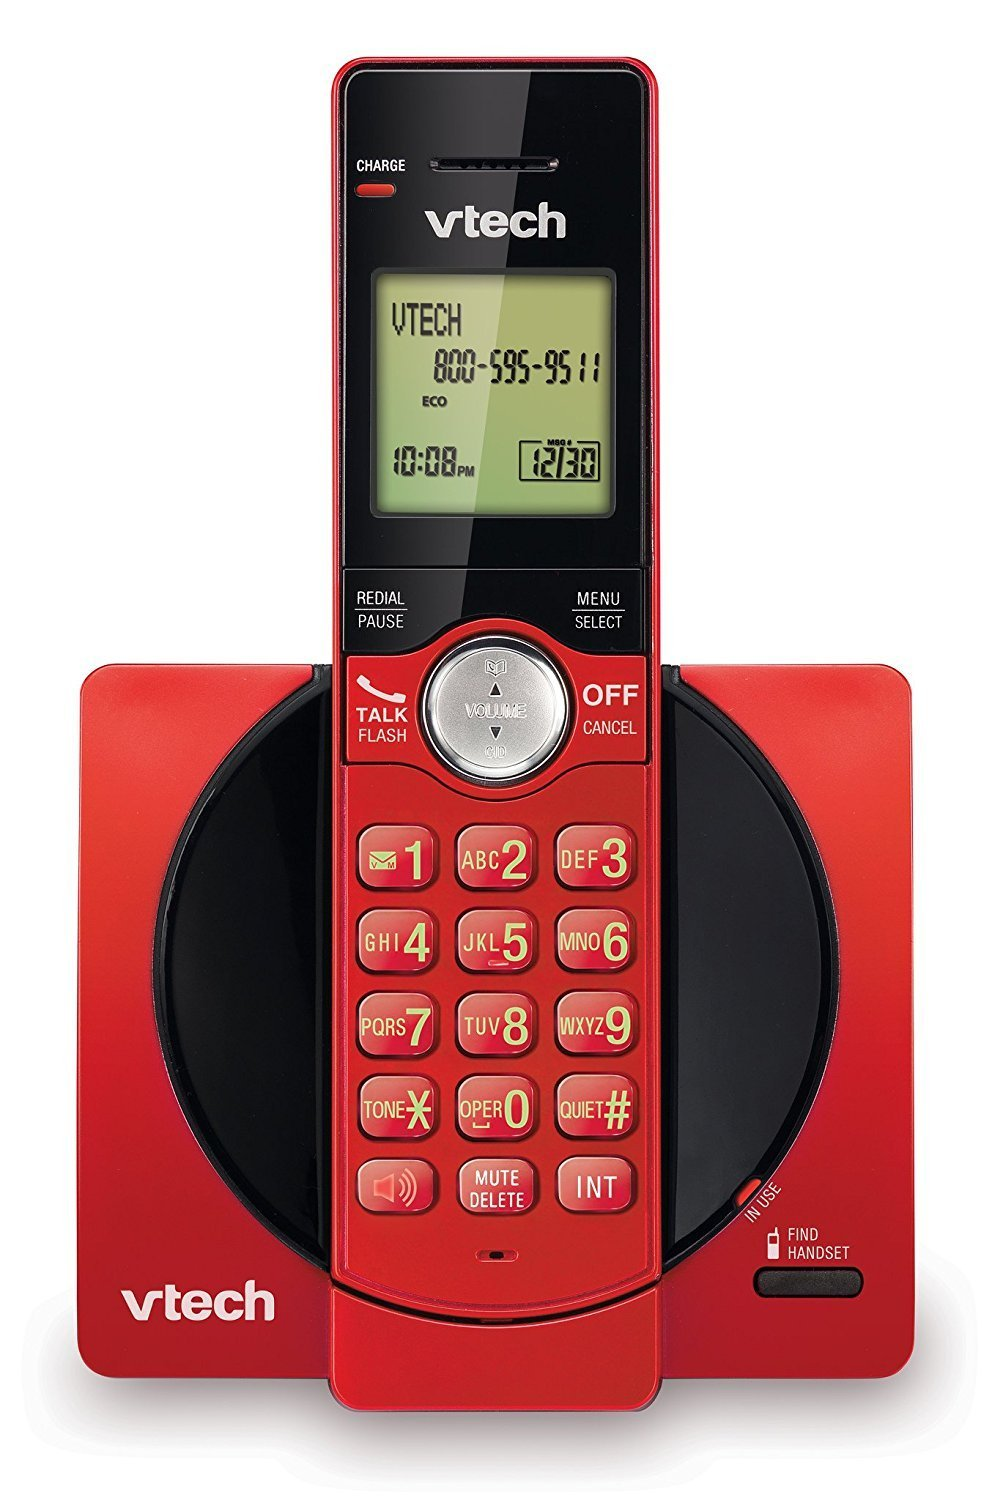 Vtech Cs6919-16 Dect 6.0 Cordless Phone With Caller Id/call Waiting - Red™